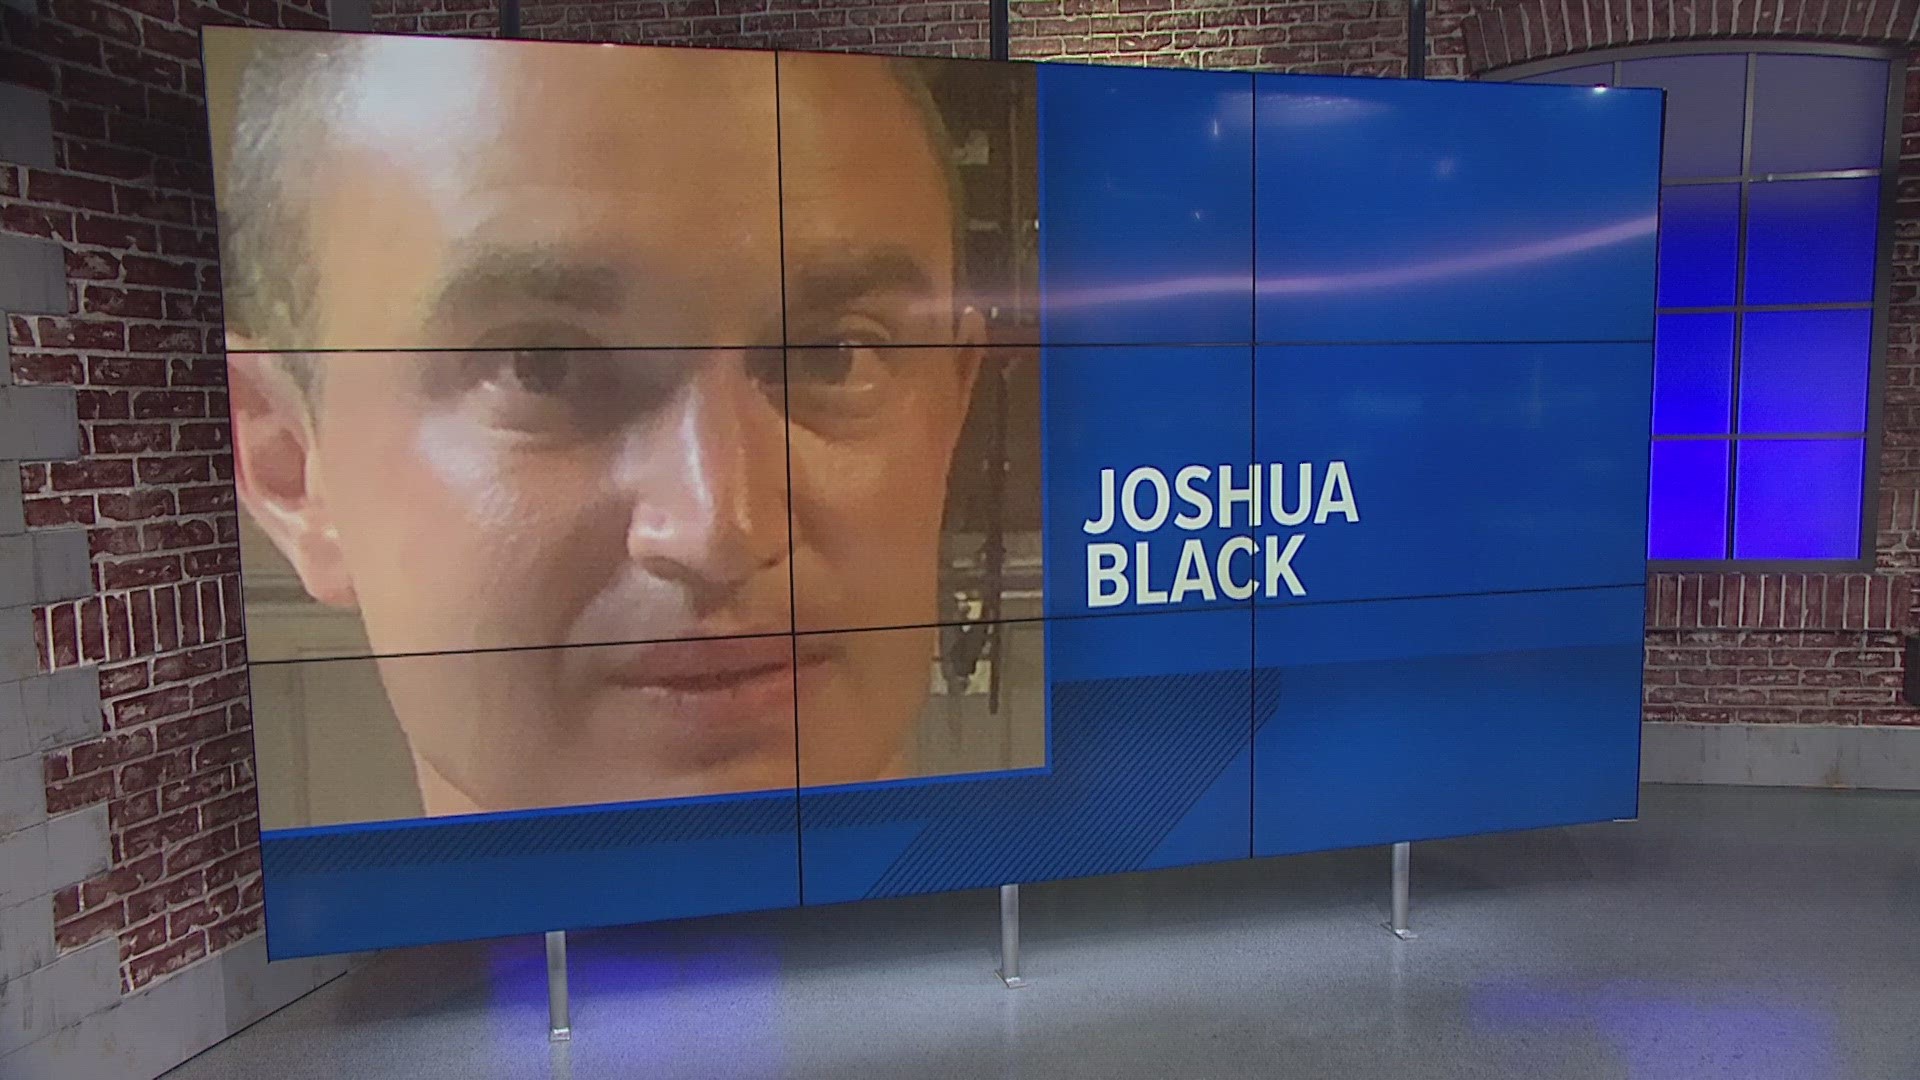 Joshua Black faces a number of charges for the alleged sexual assault.